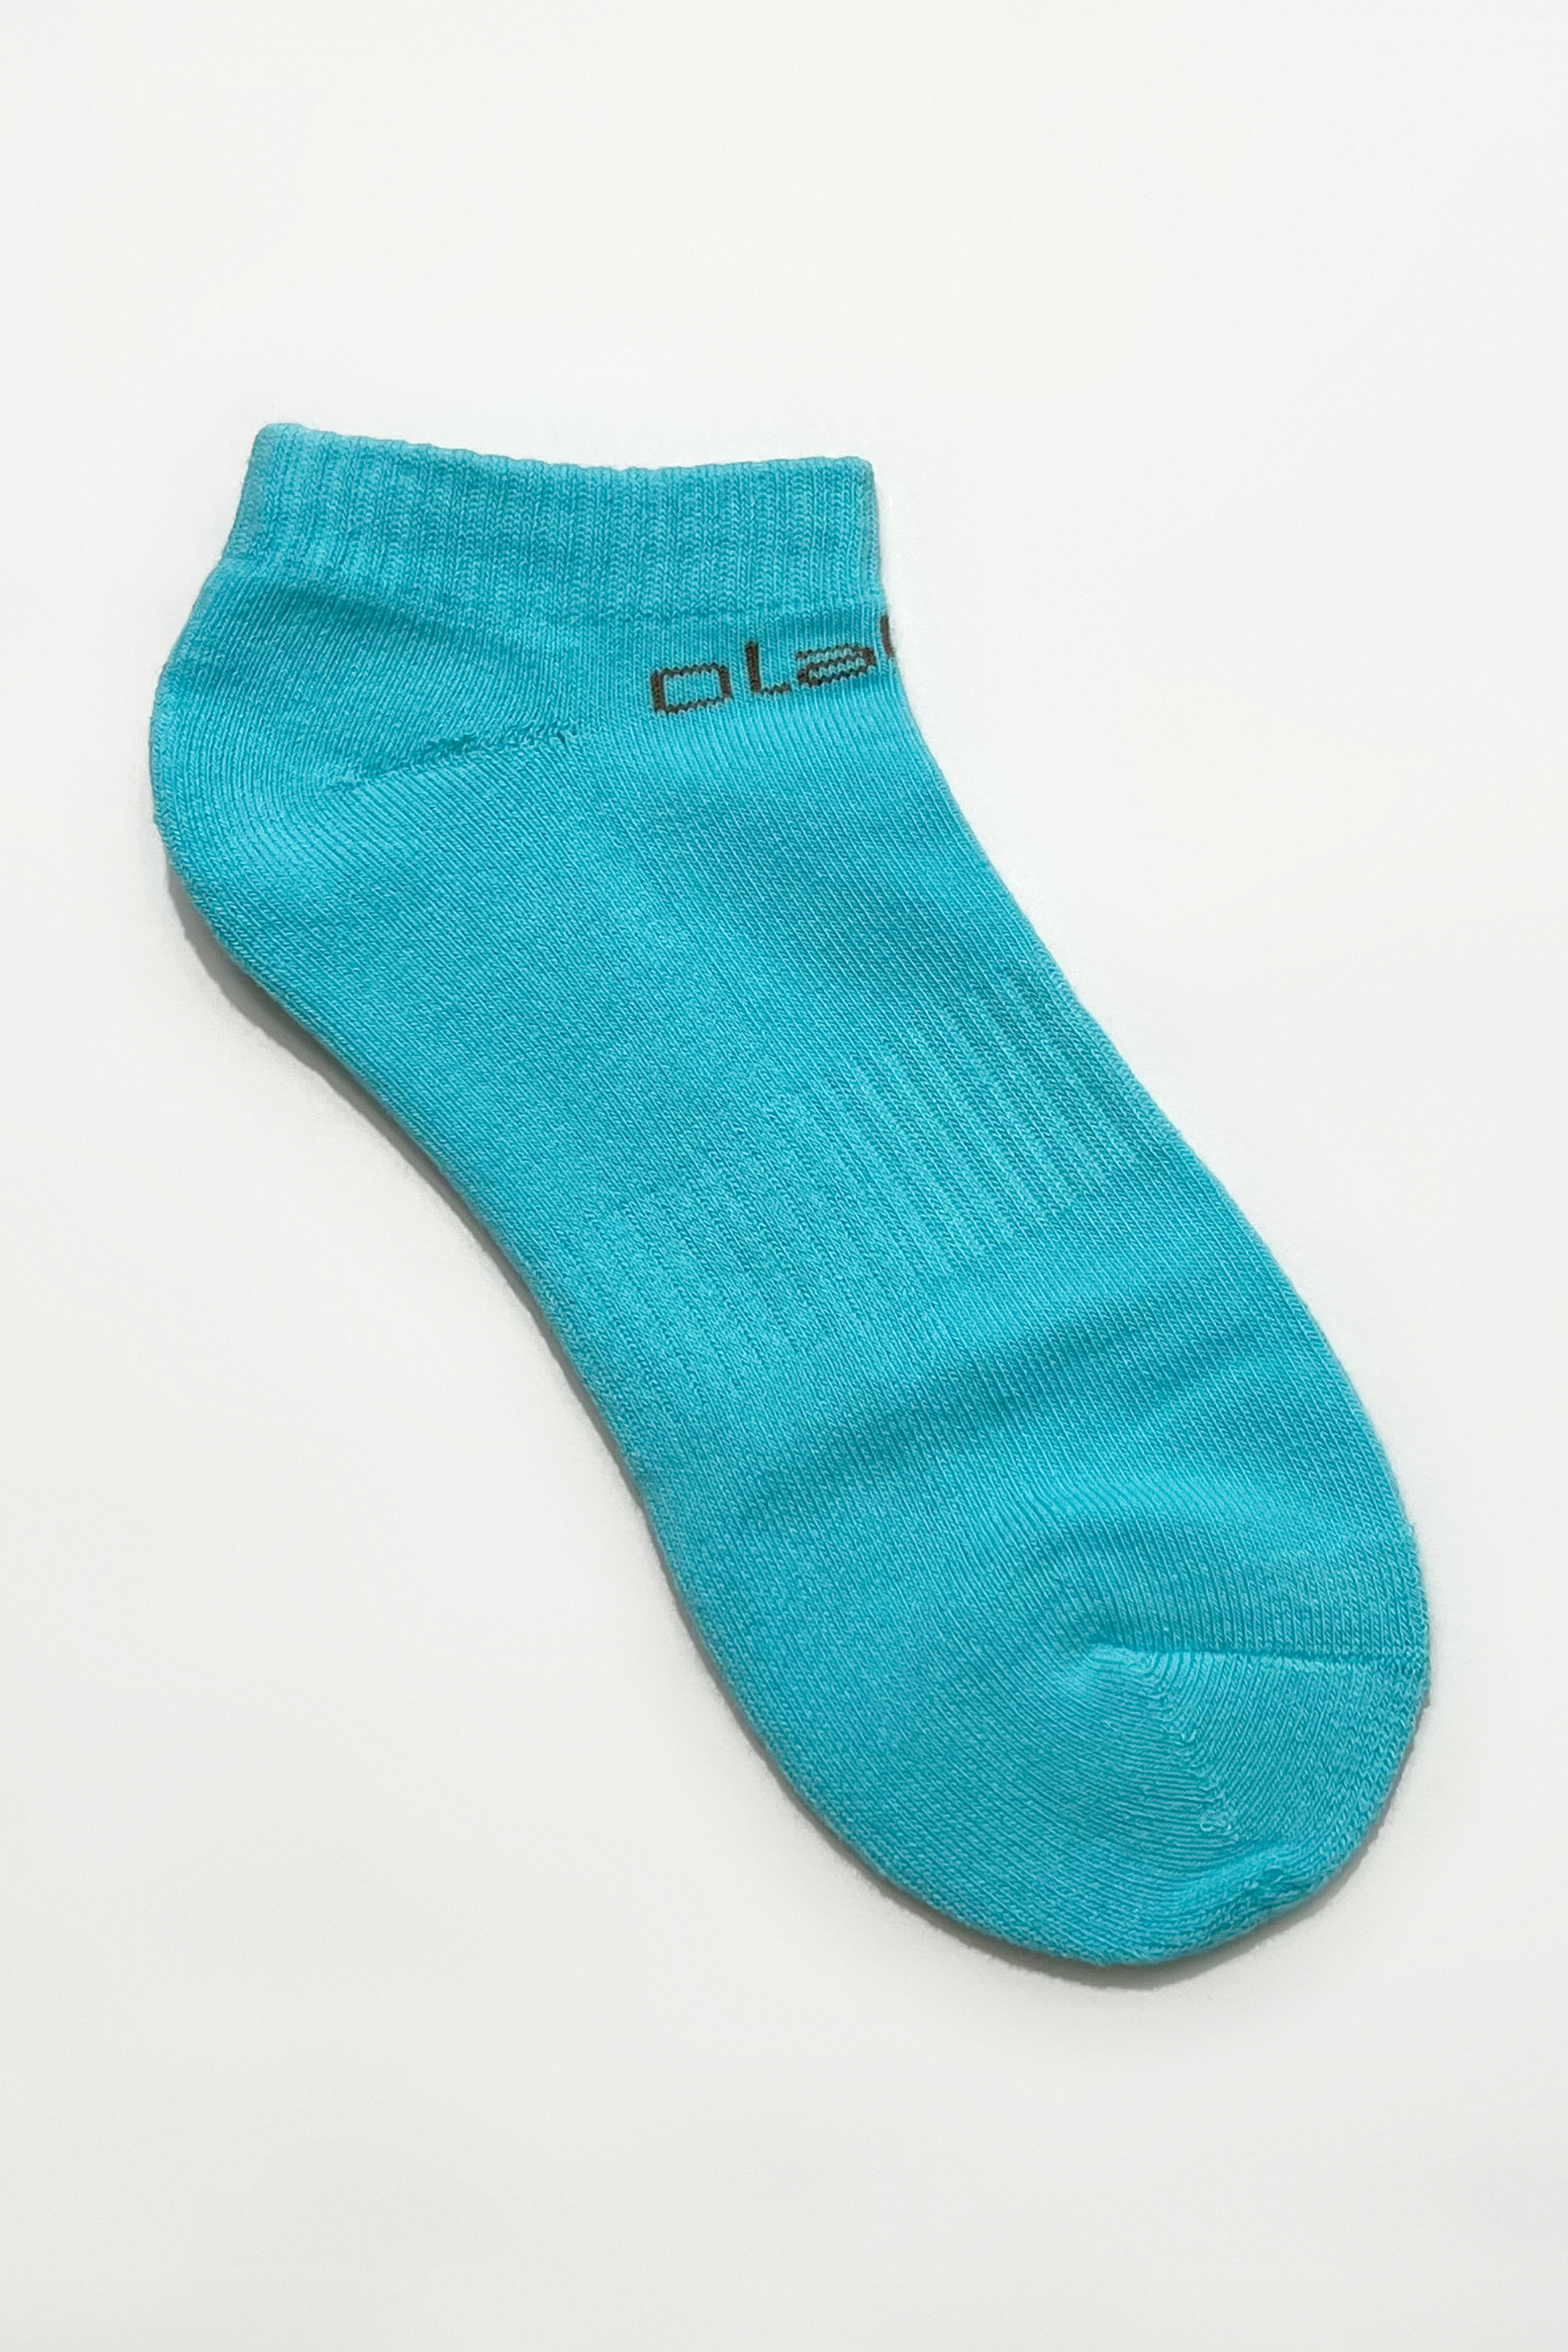 Colorful short socks in blue and airy design, perfect for a stylish and comfortable look.